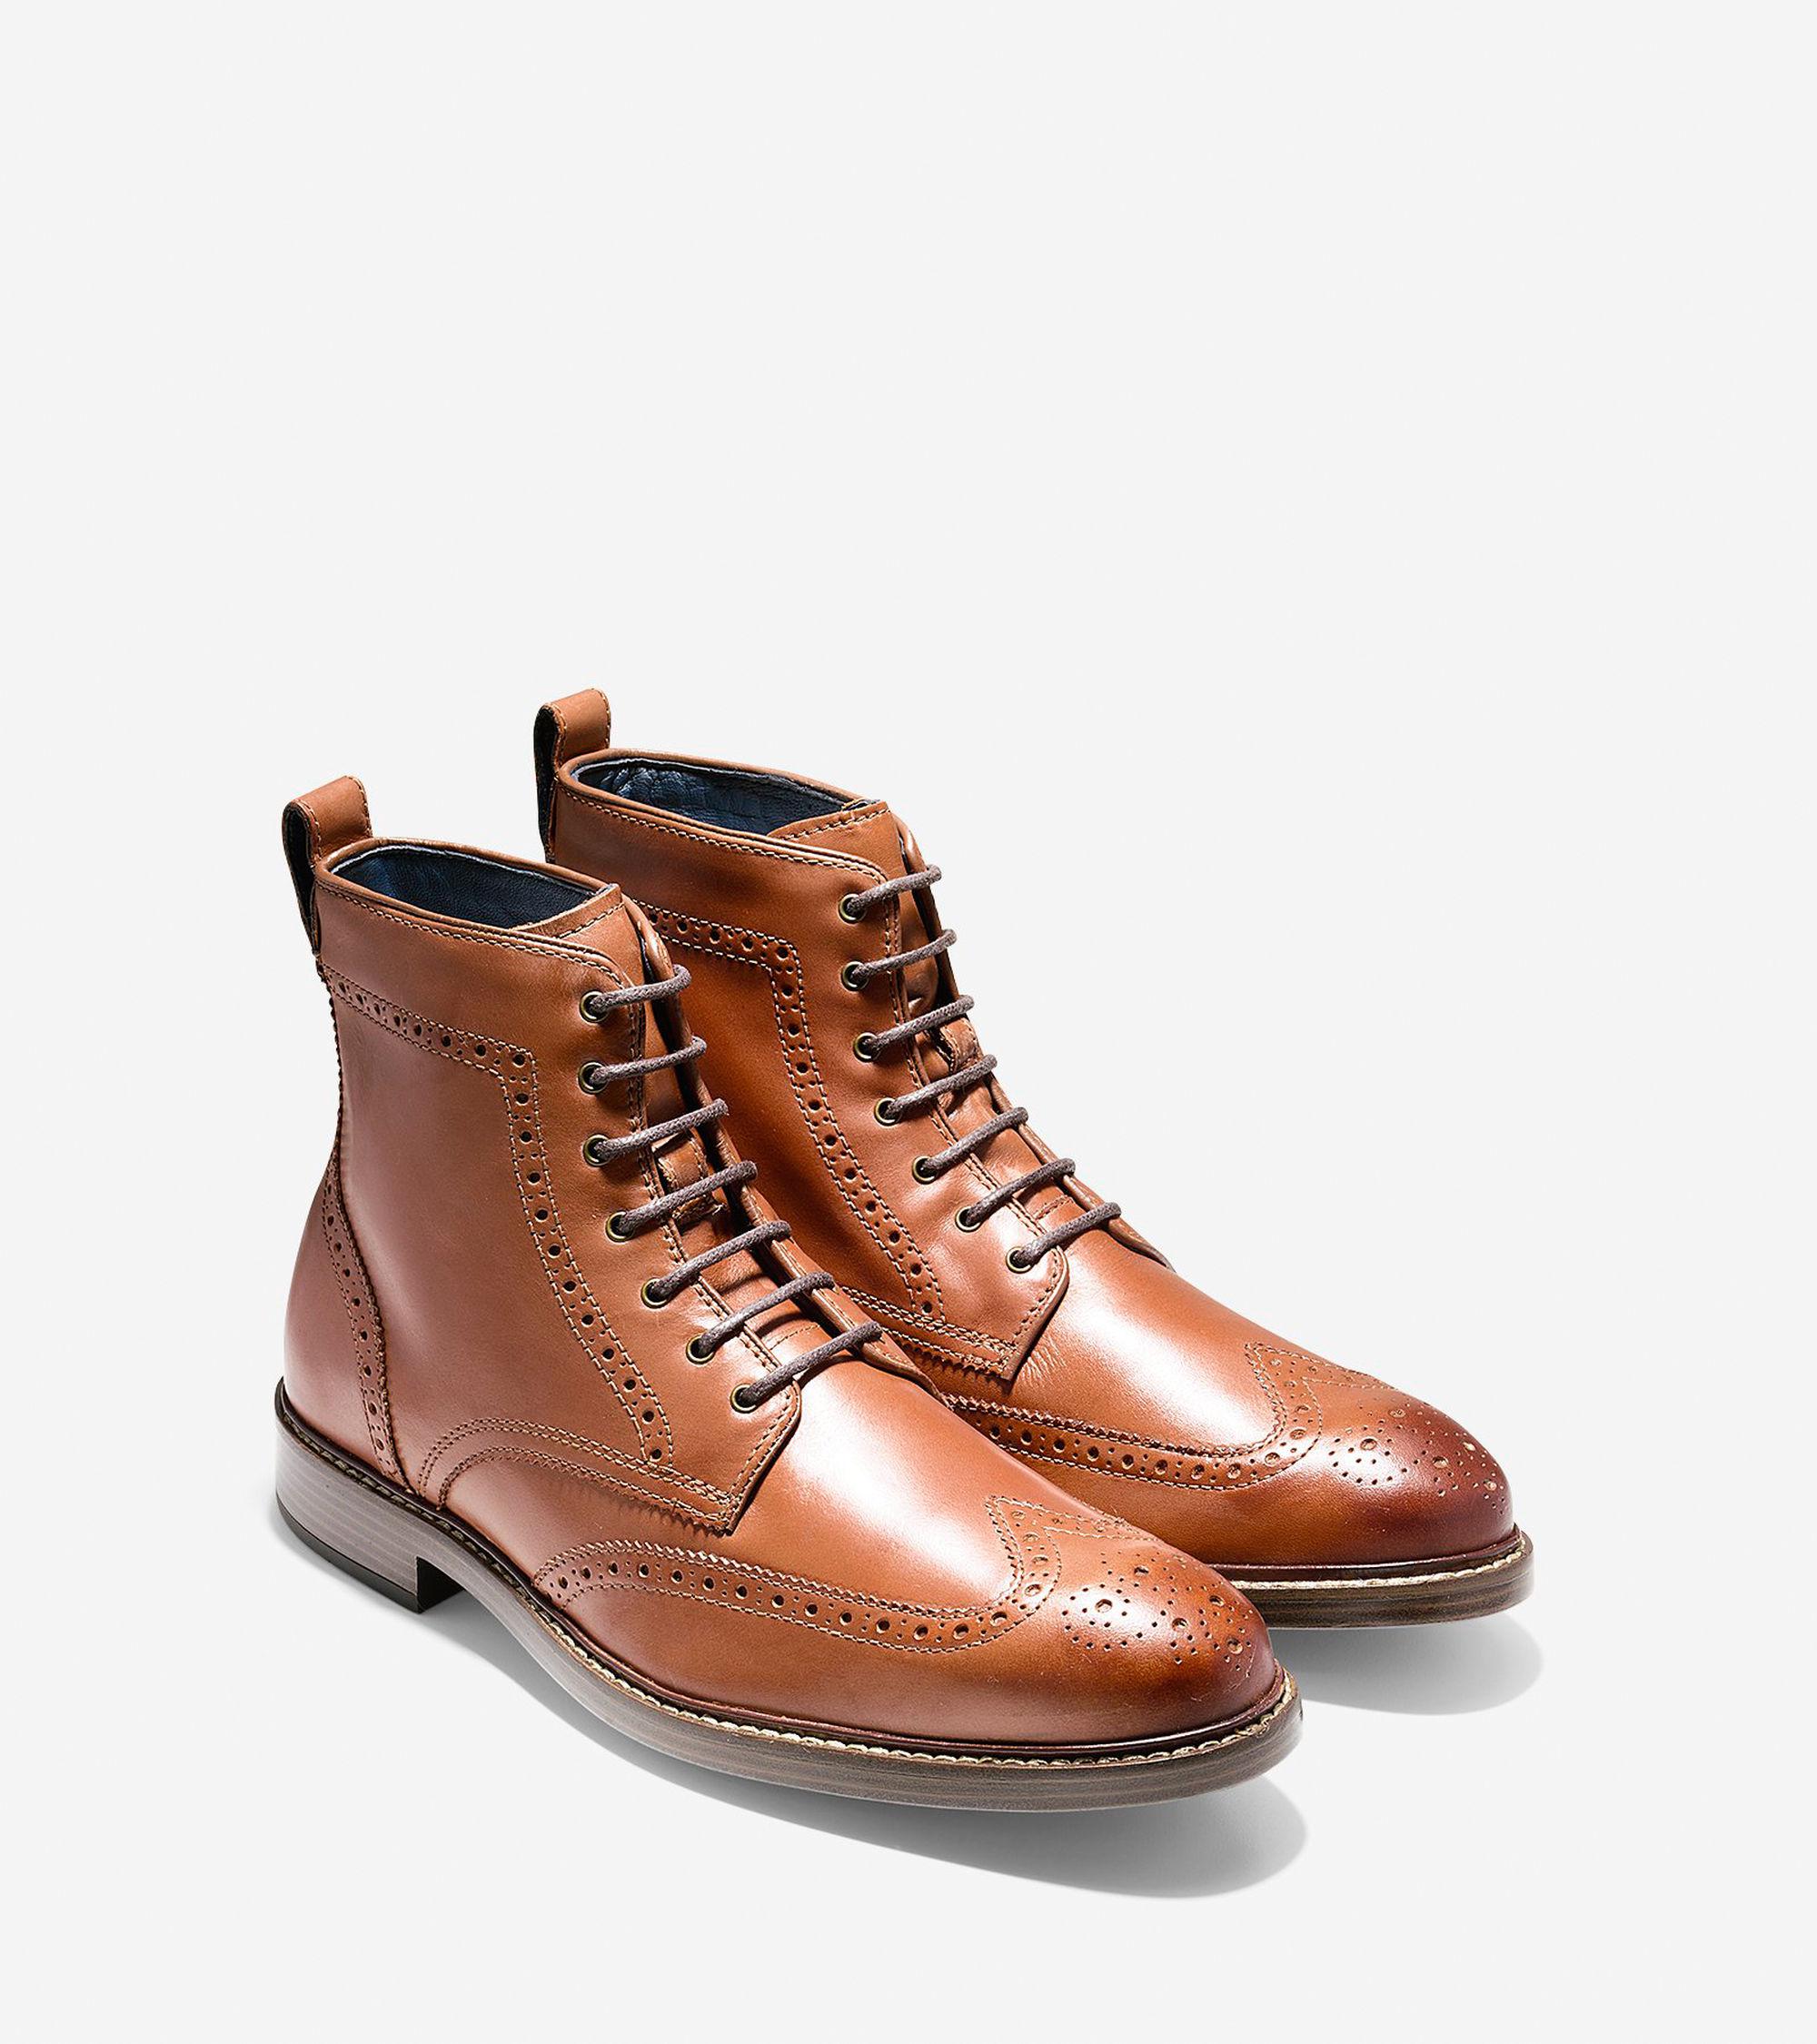 Lyst - Cole haan Kennedy Wingtip Boot in Brown for Men